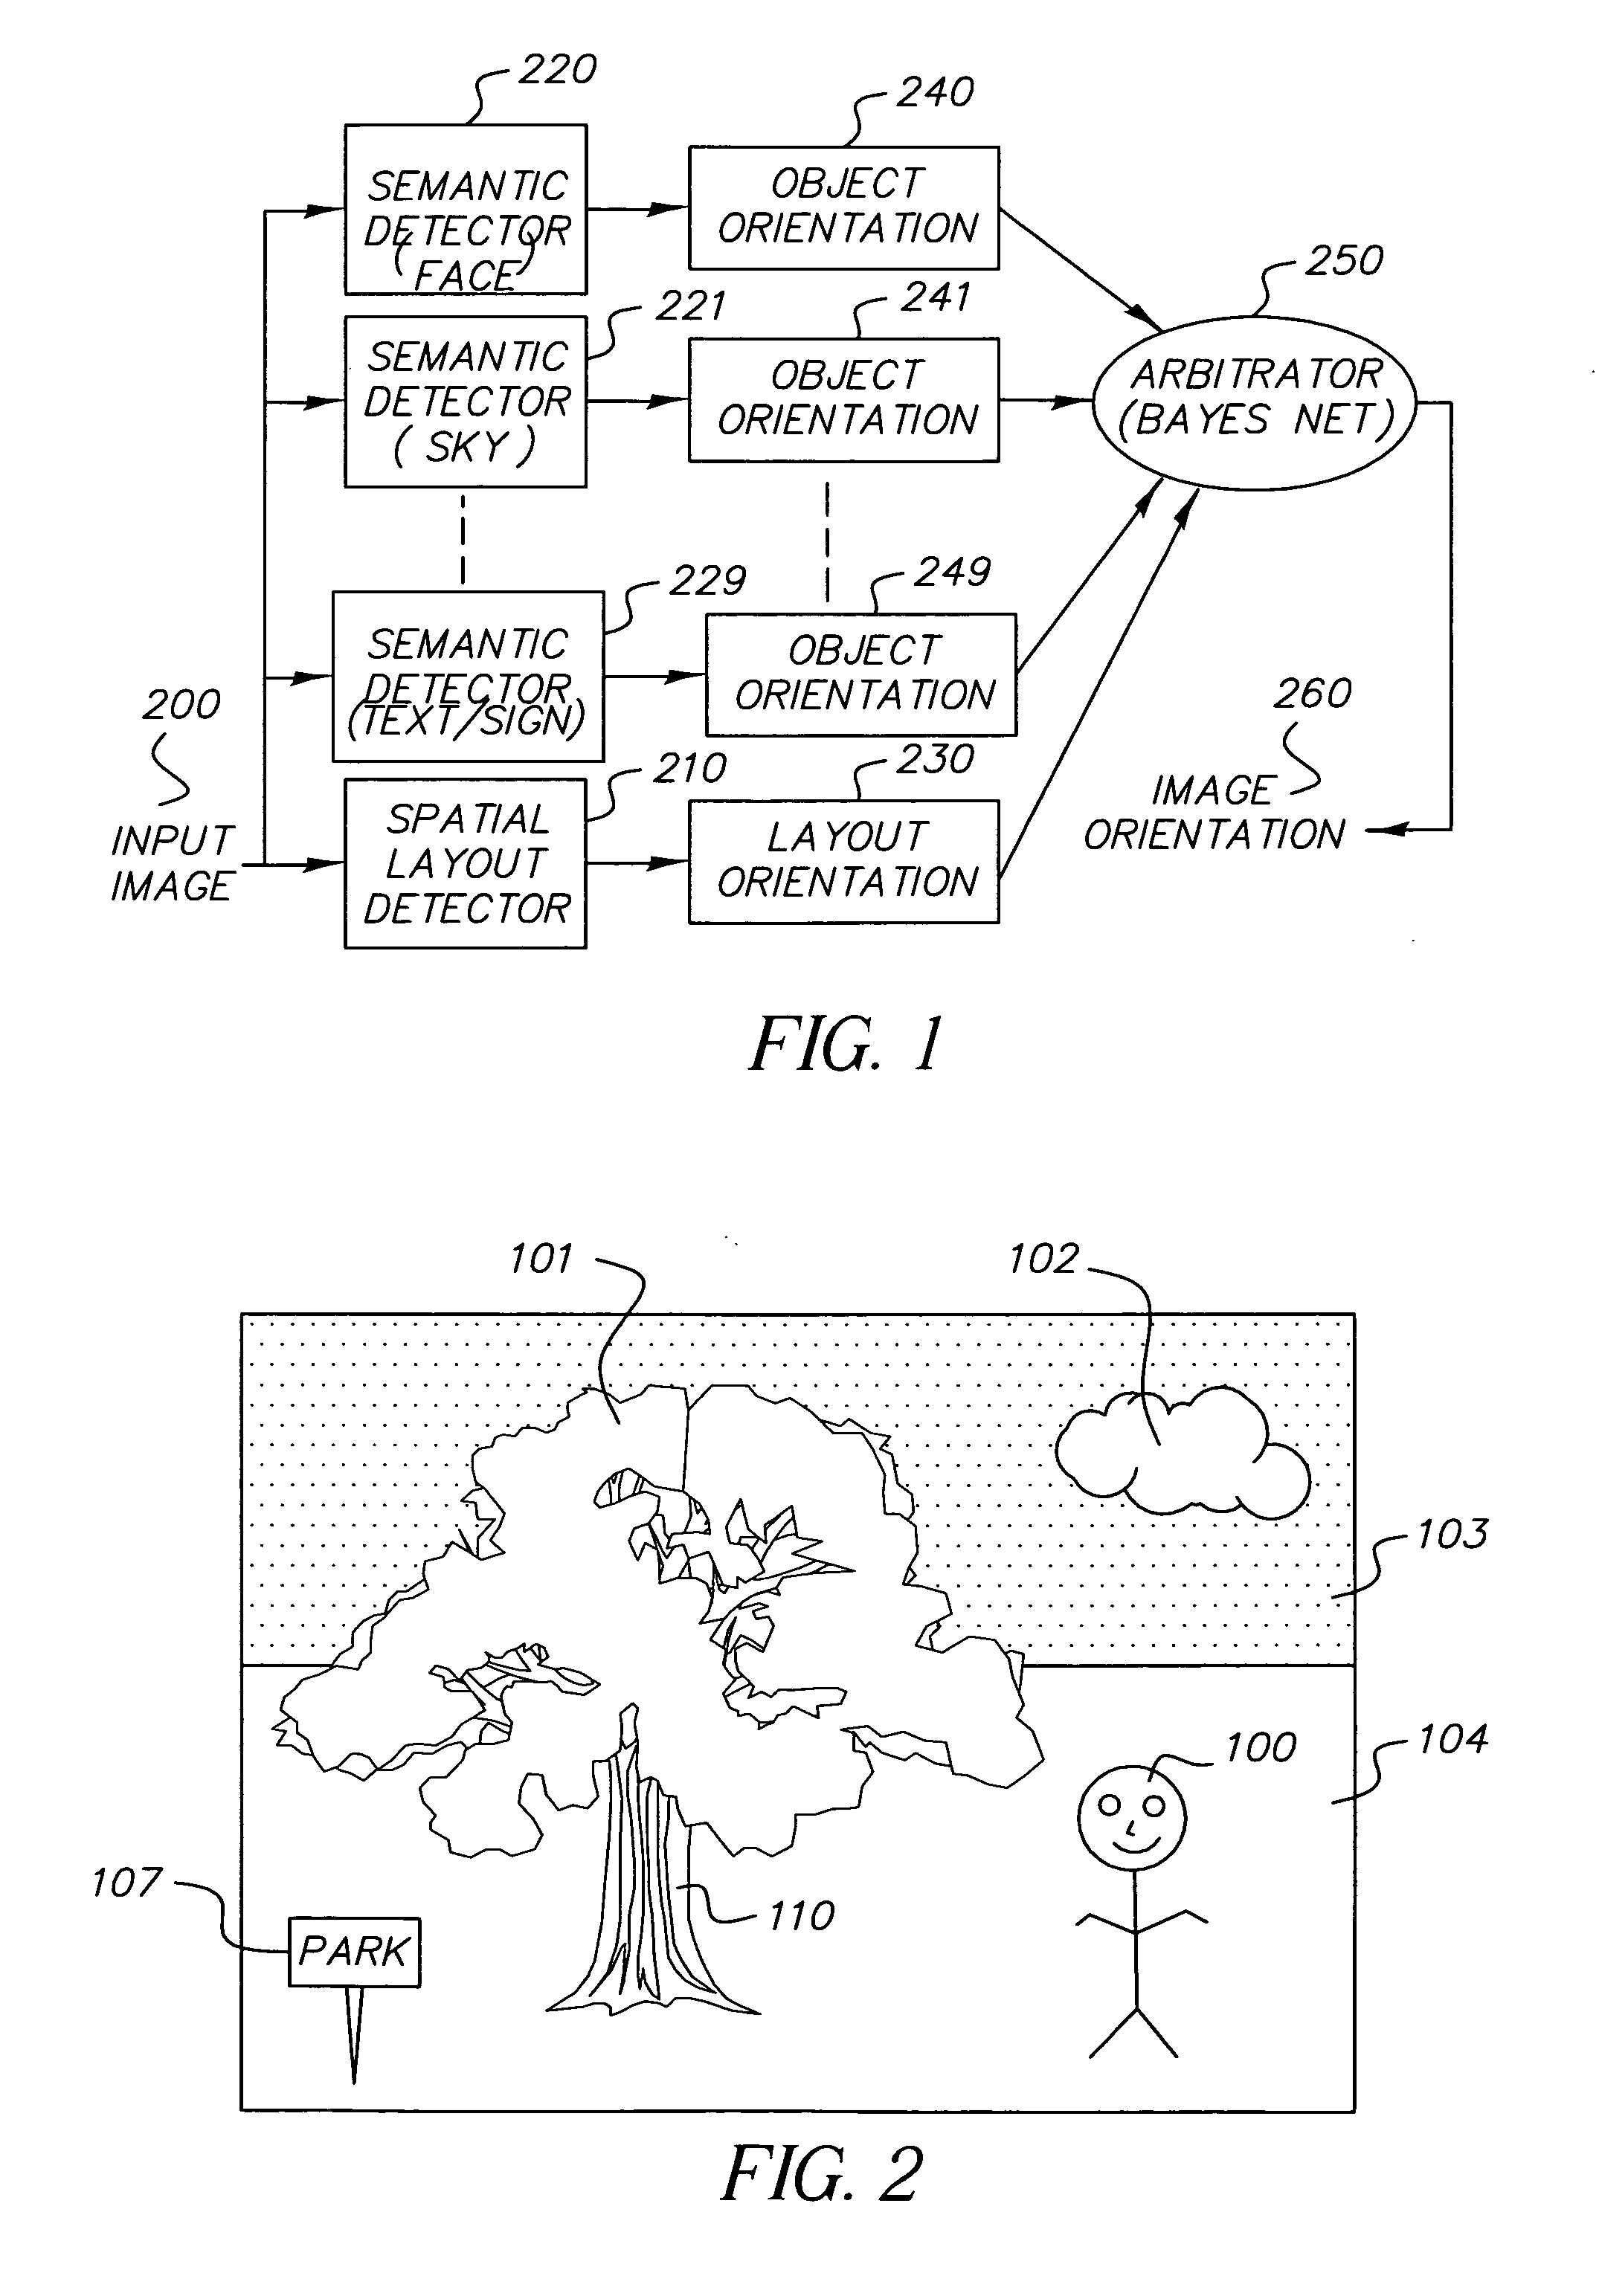 Method and system for determining image orientation